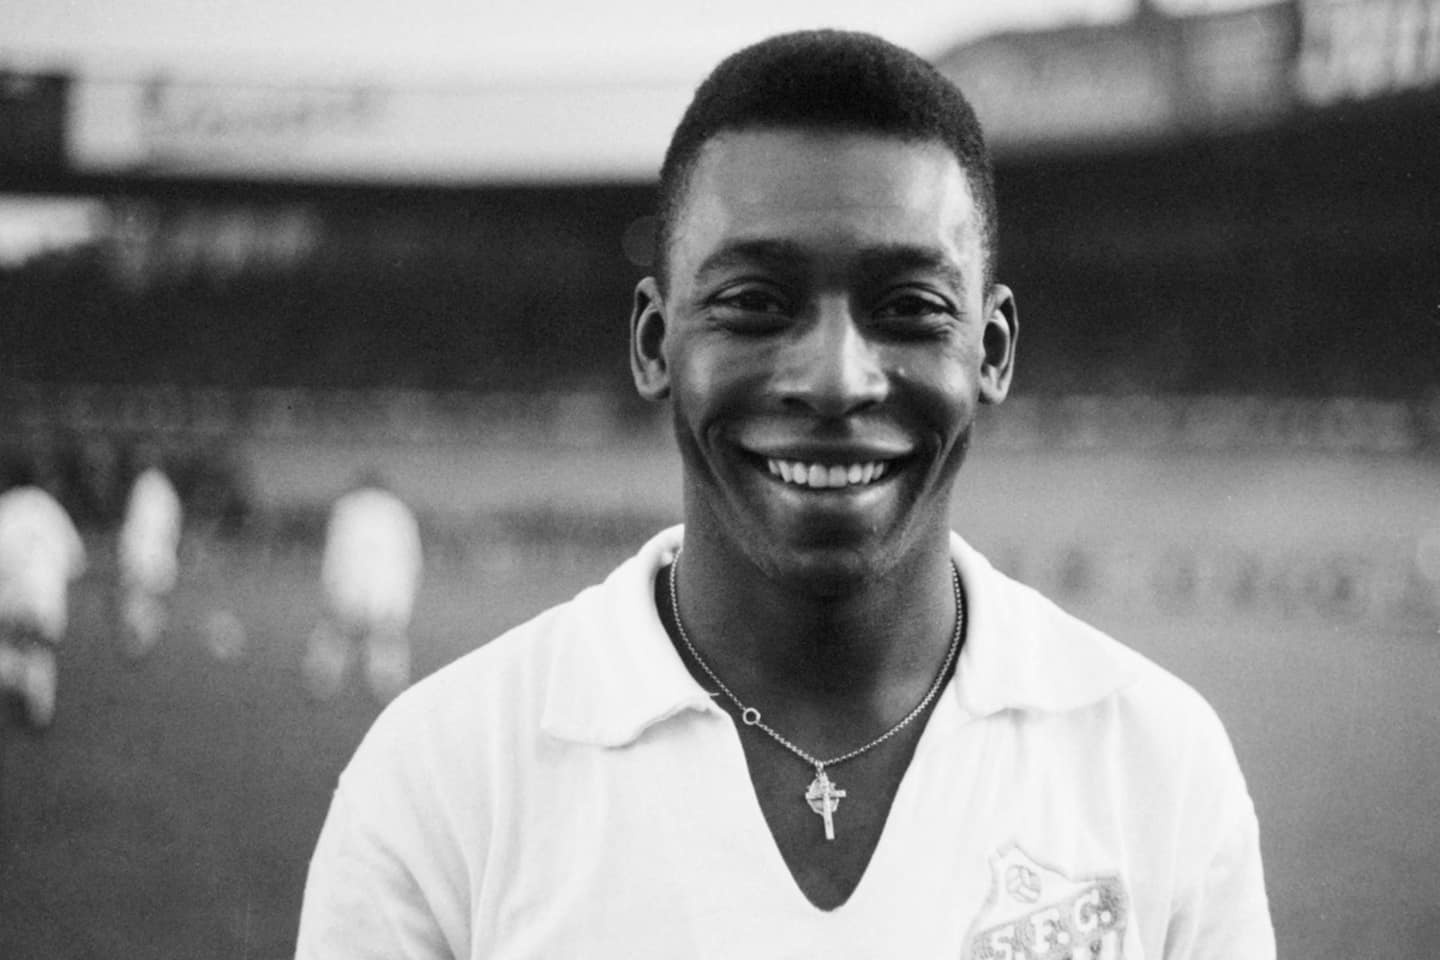 [VIDEOS] Pelé (1940-2022): here are four legendary games of the "King"